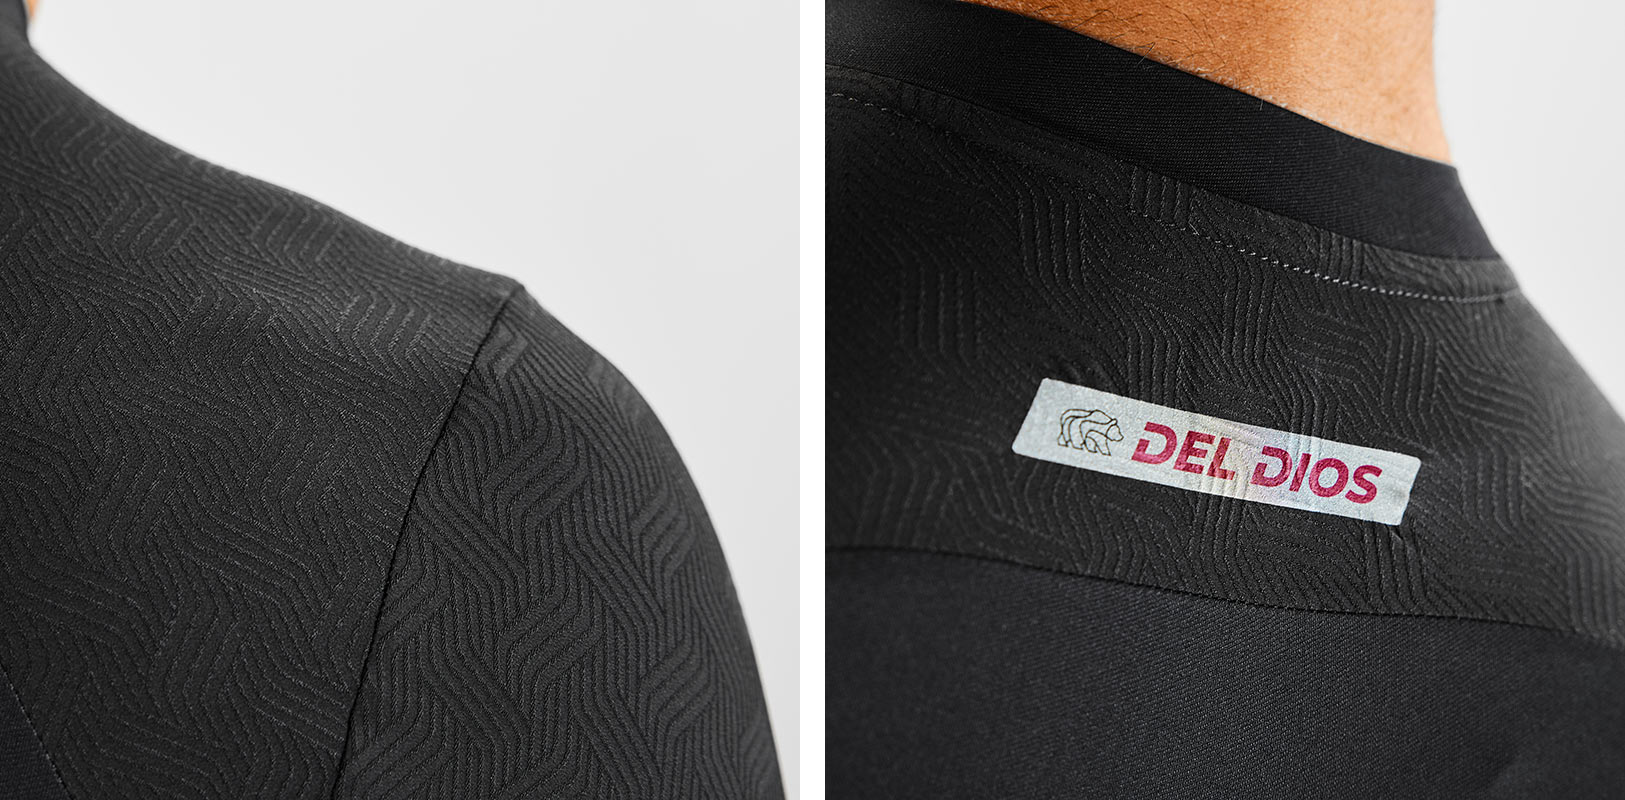 Eliel Del Dios cycling kit details of shoulder yoke and sleeves